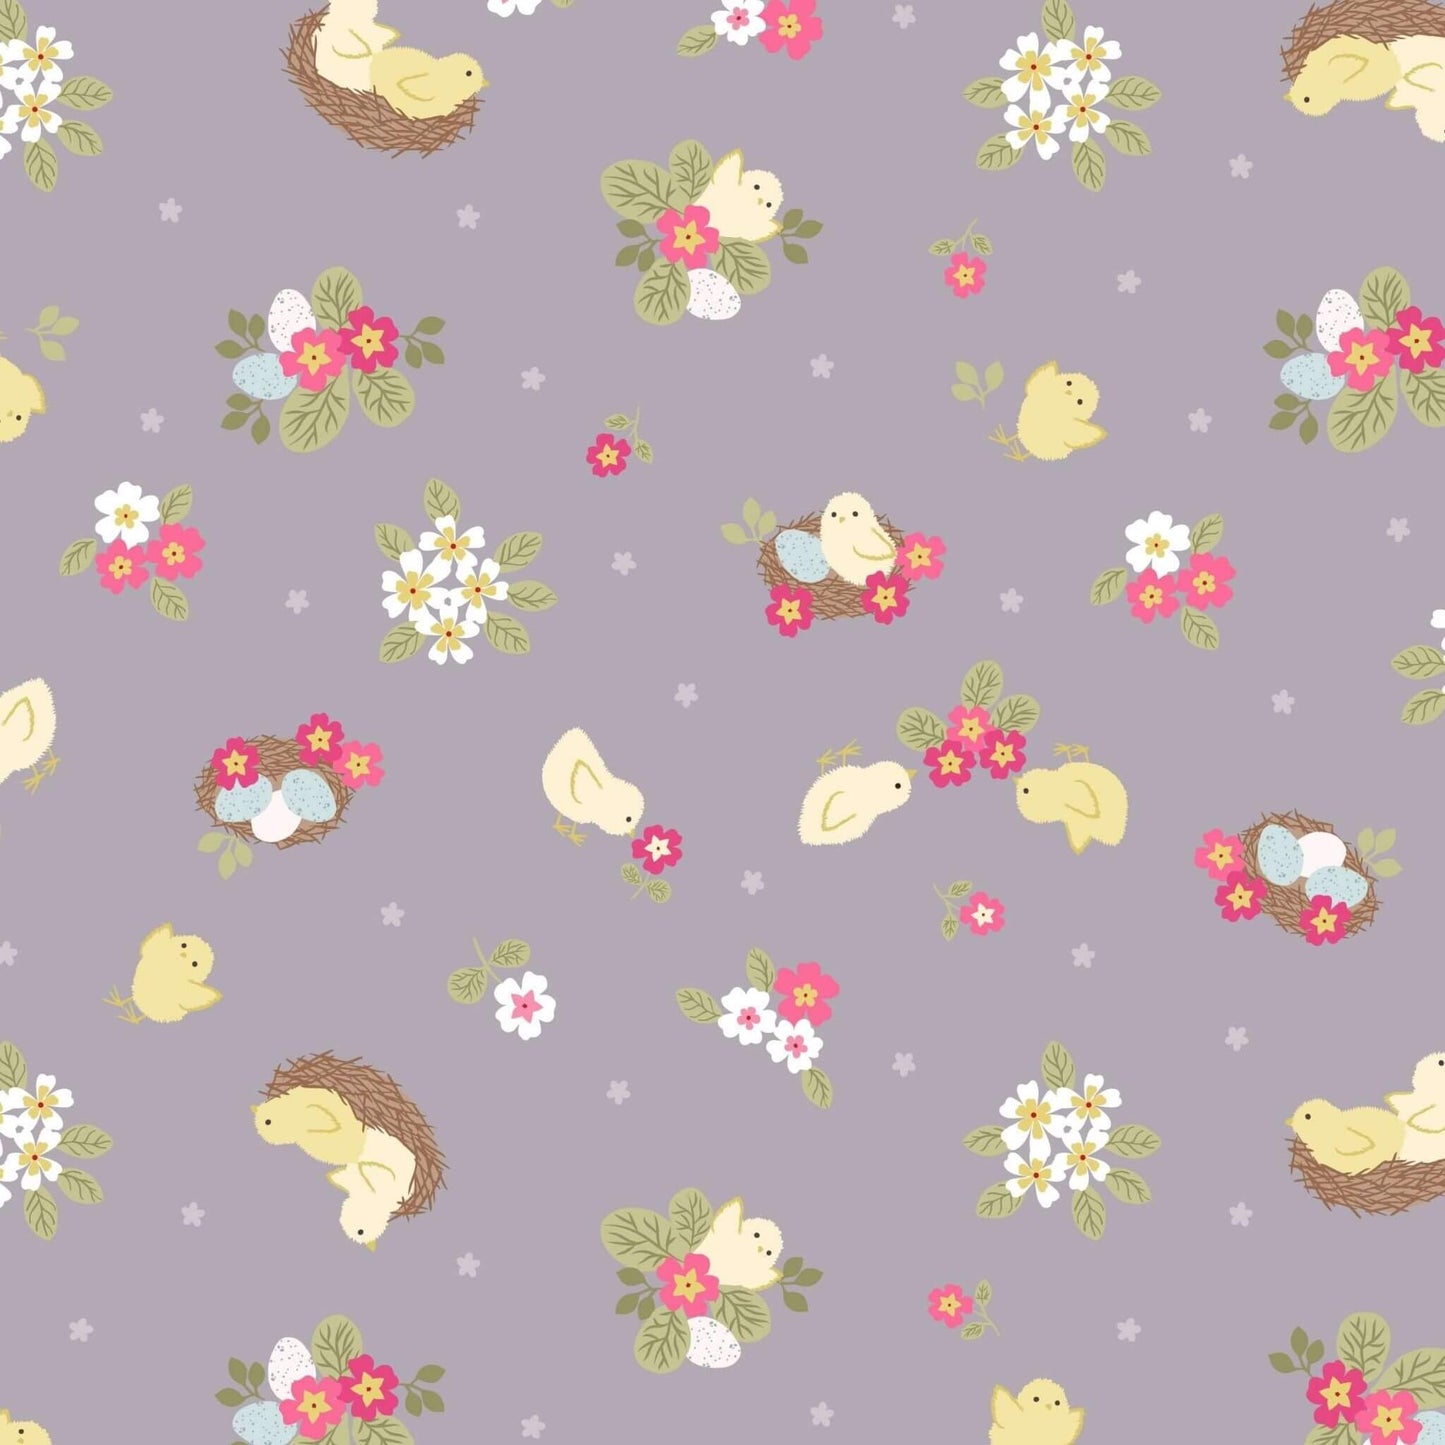 Chicks - Bunny Hop Fabric Range - Lewis and Irene - Natural